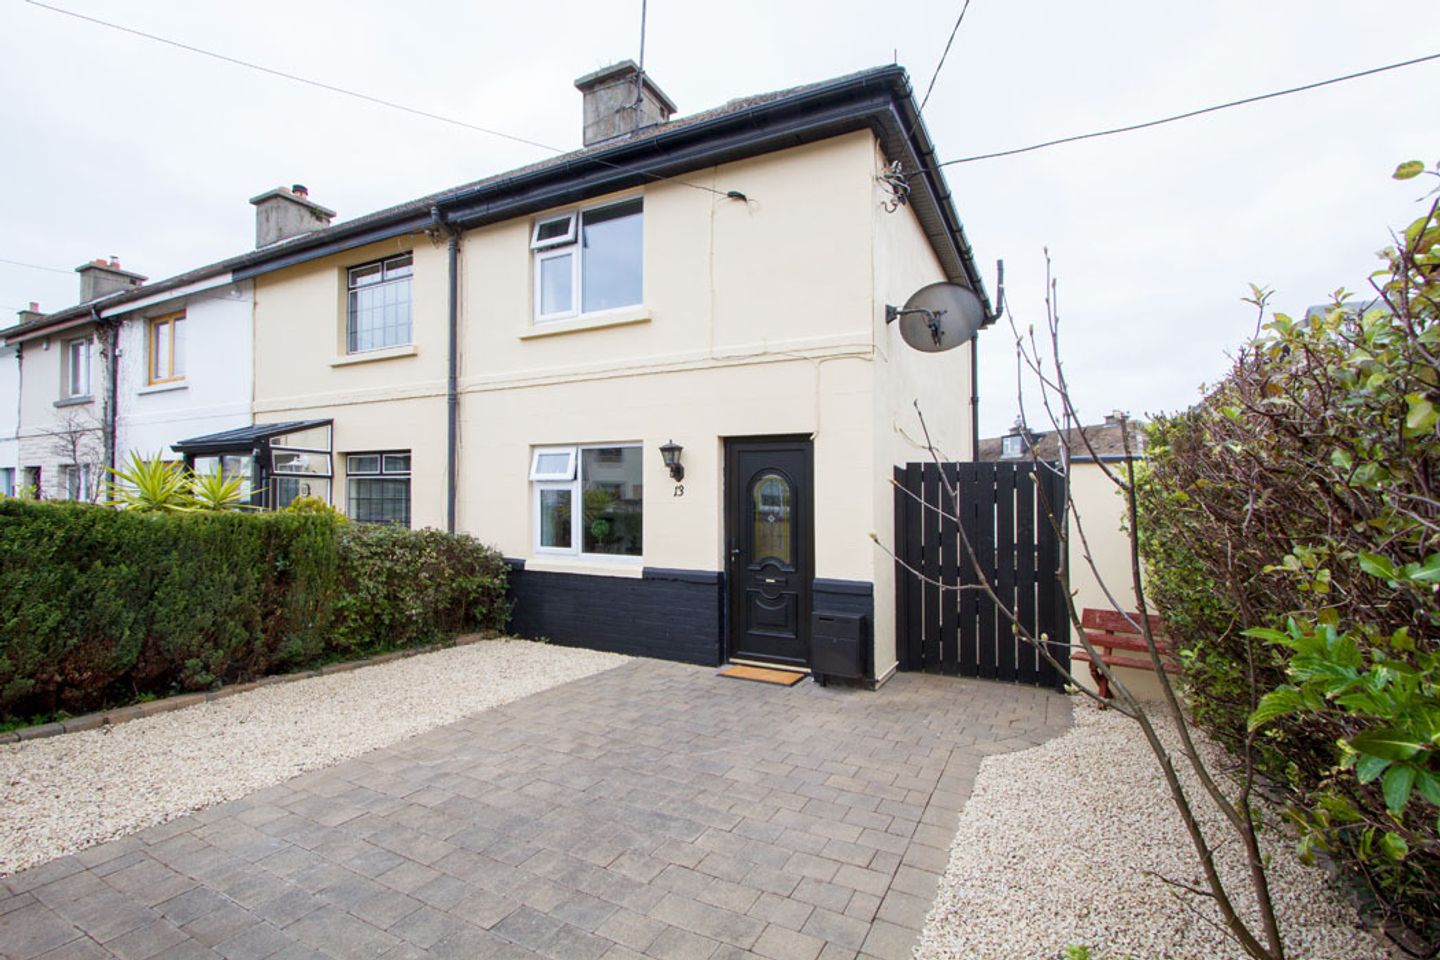 13 Wolfe Tone Square Middle, Bray, Co. Wicklow